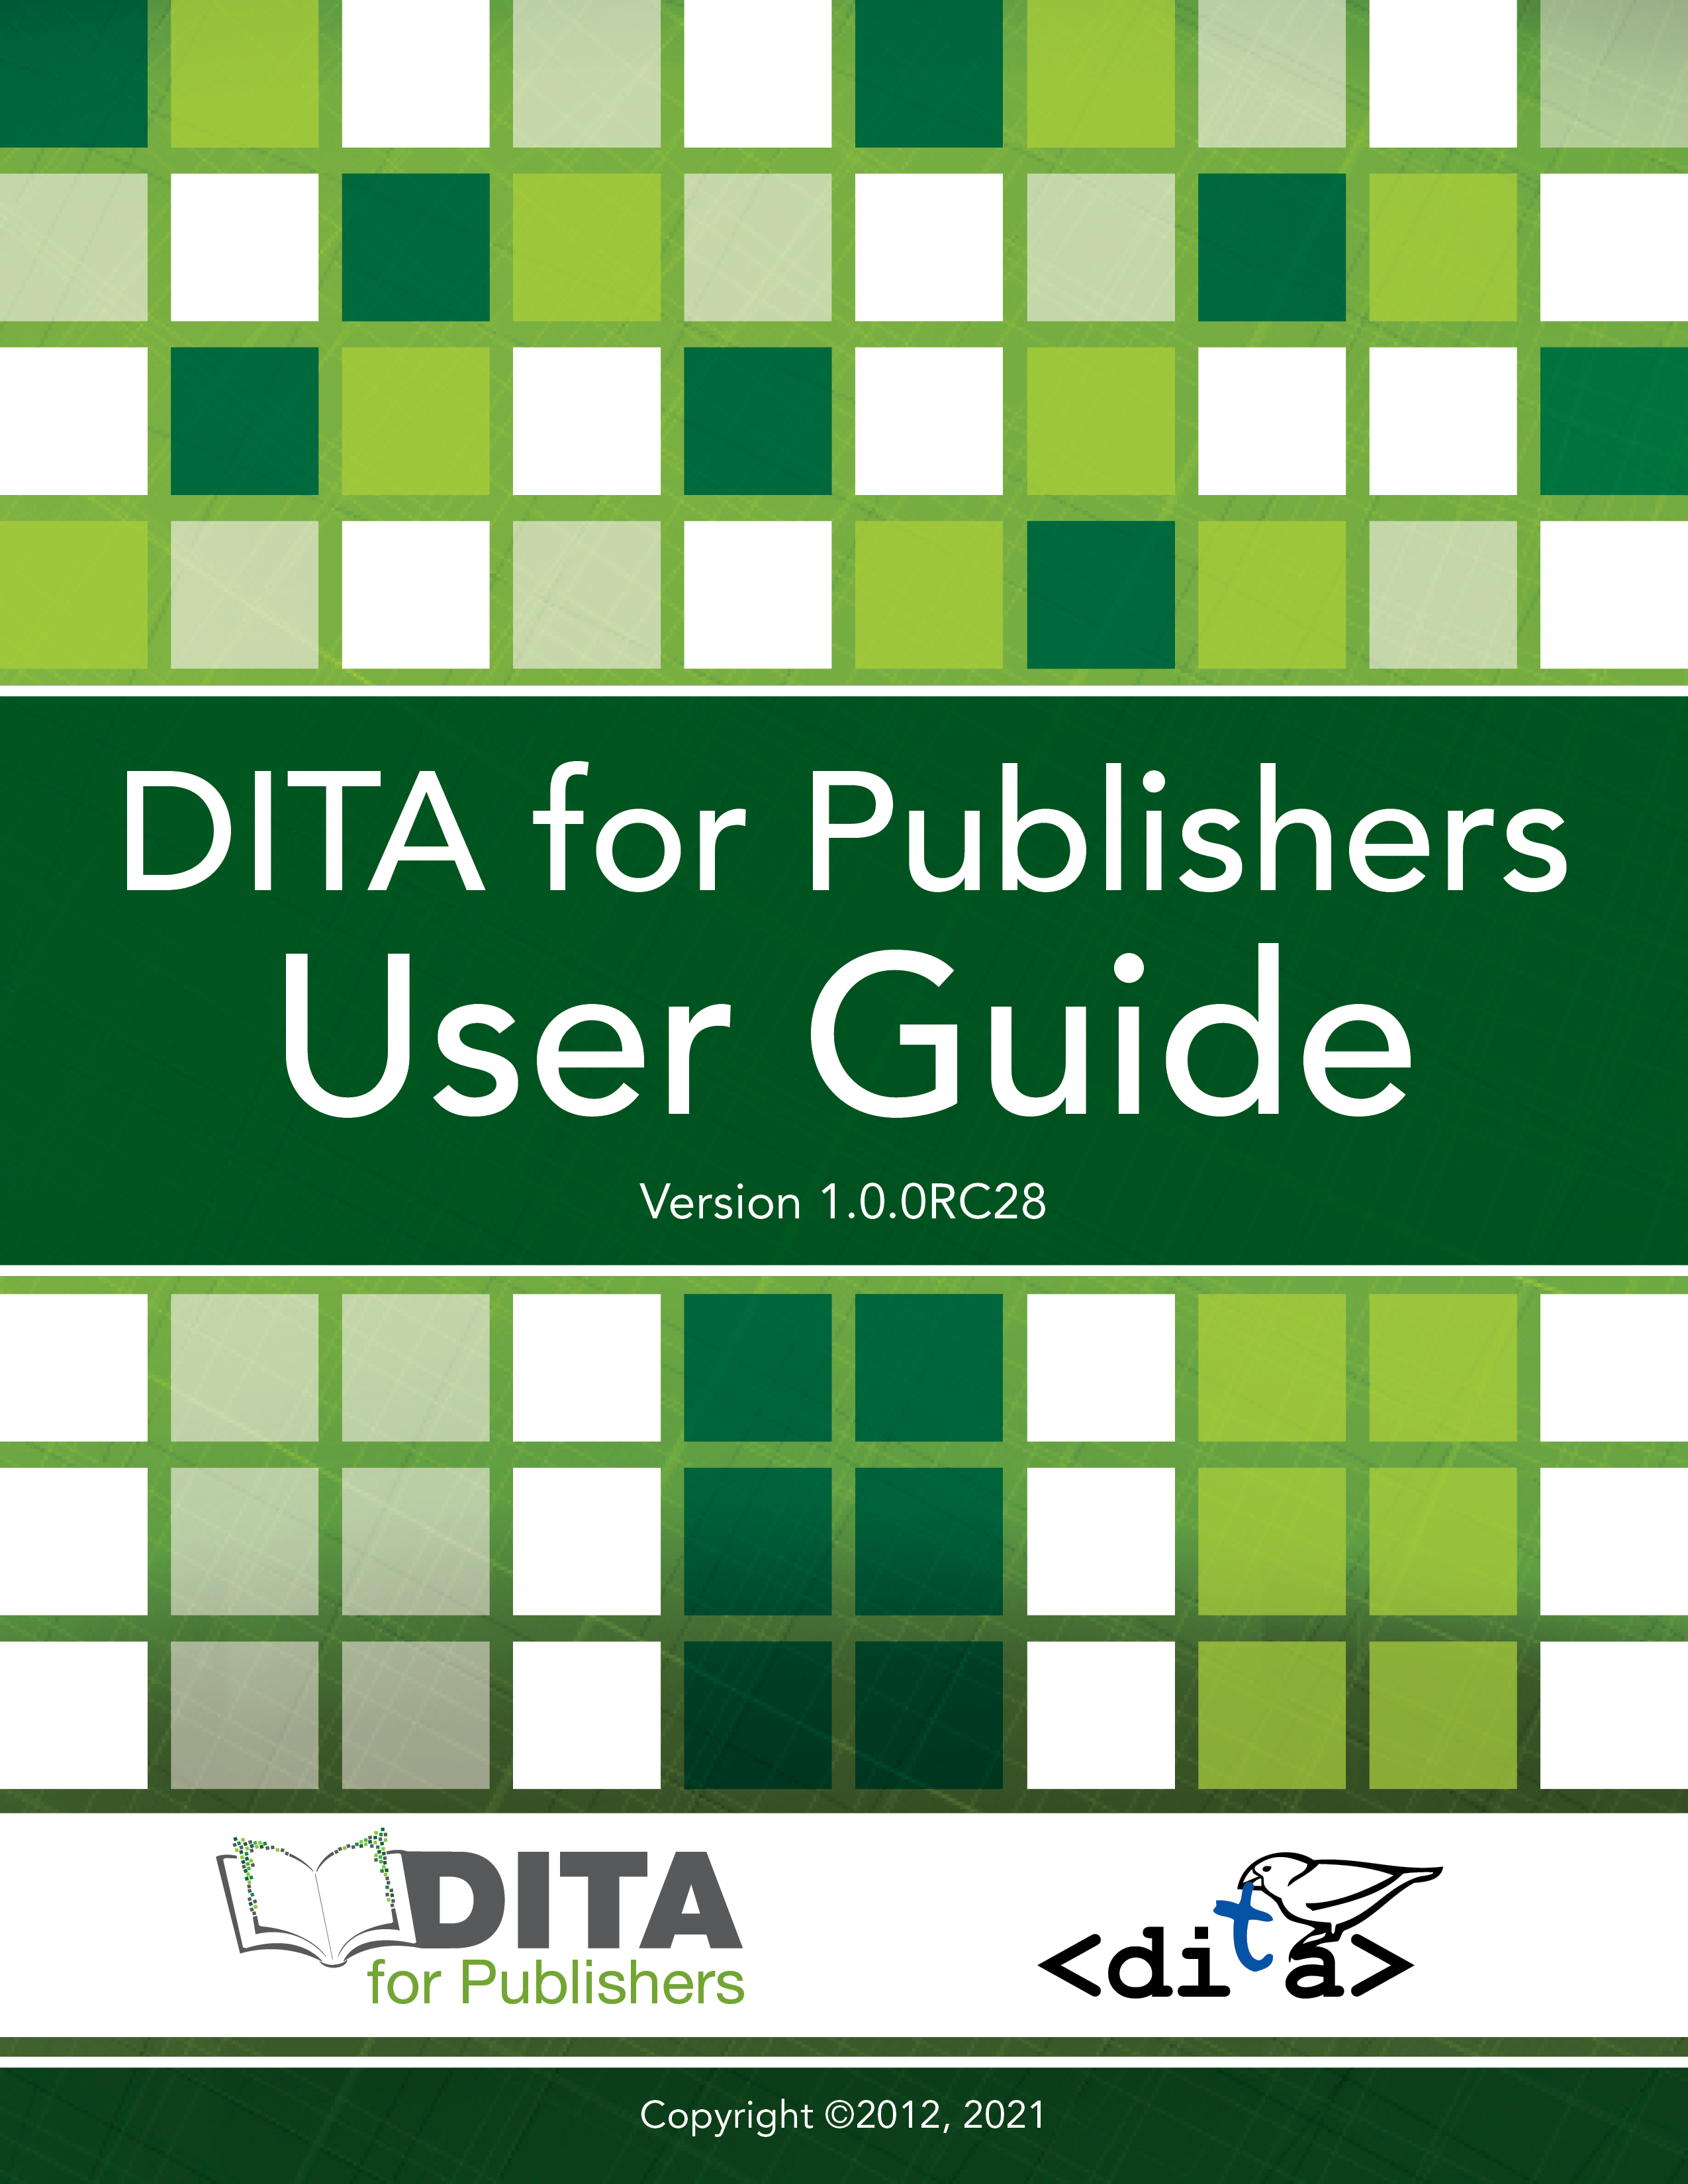 DITA For Publishers User Guide cover page